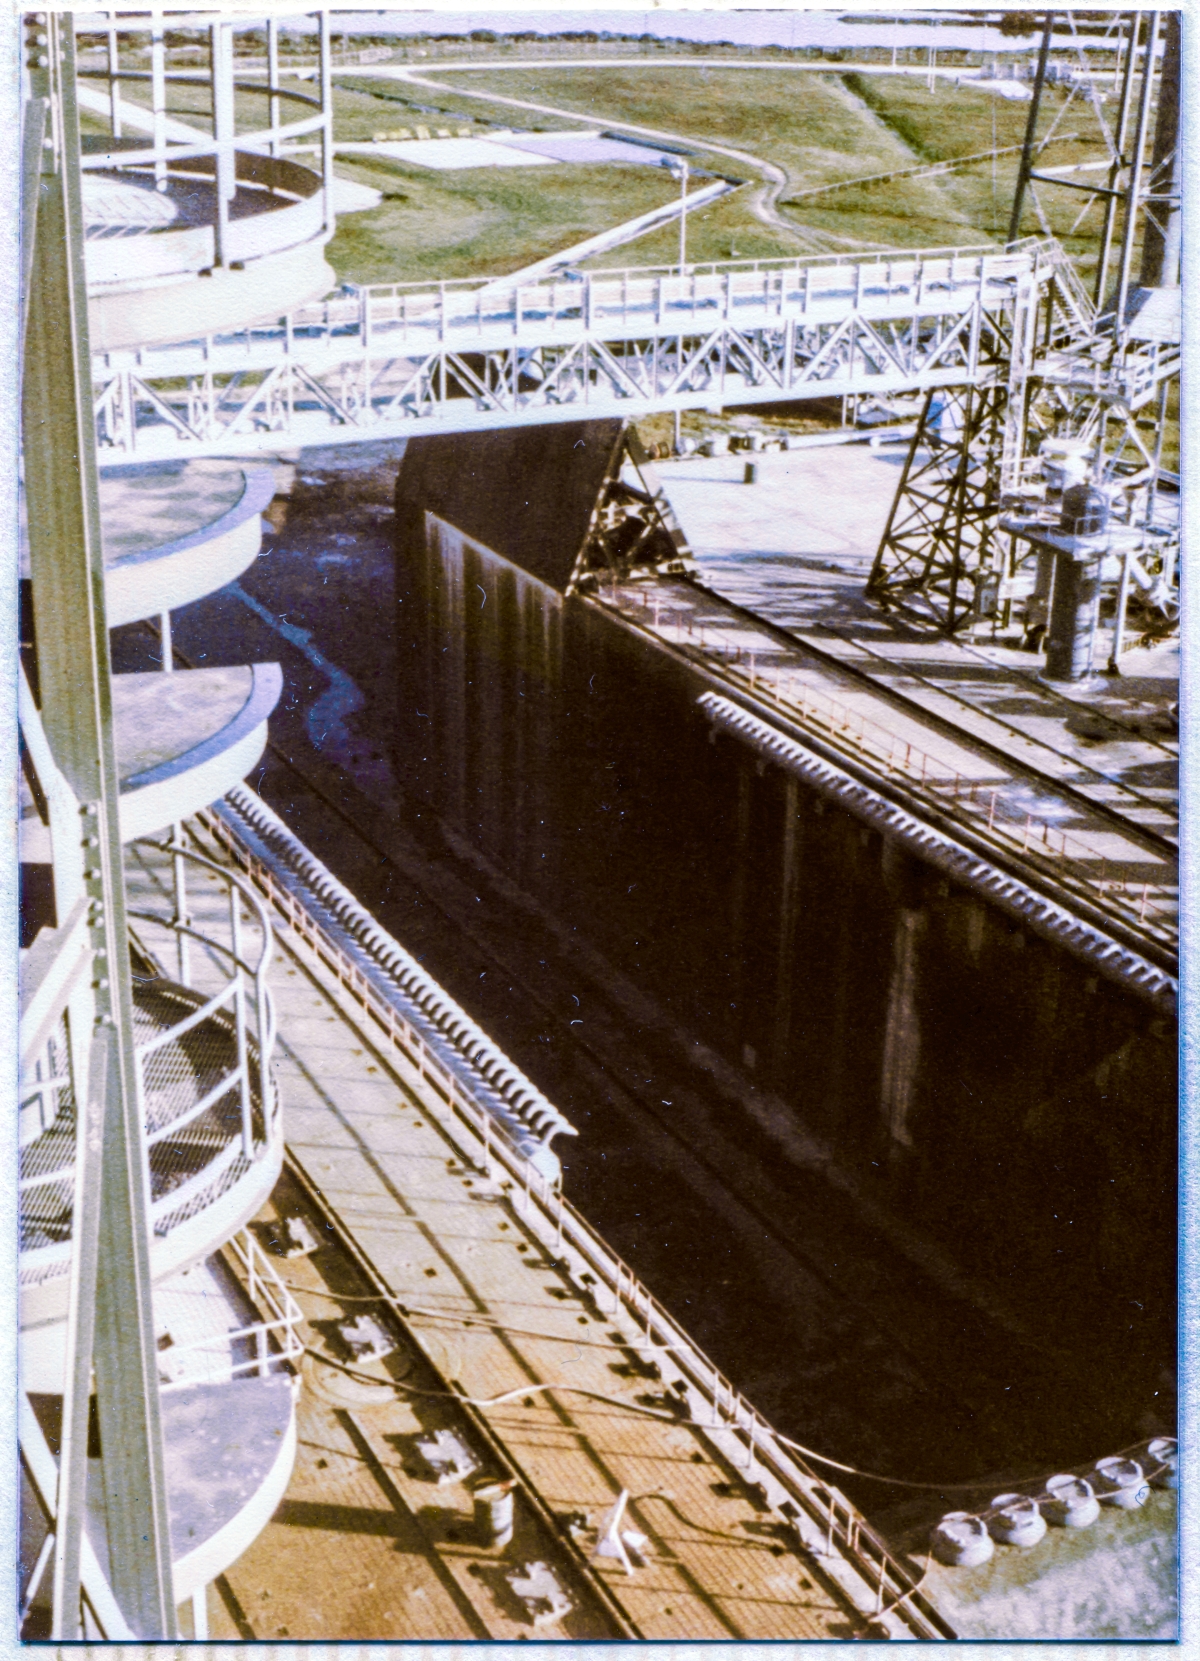 Image 024. From a viewpoint at the front corner of the left Tail Service Mast Access Platform, at the 125’ elevation of the Rotating Service Structure, looking northeast and down, the dark open gash of the Flame Trench at Launch Complex 39-B, Kennedy Space Center, Florida, dominates a frame encompassing a science-fiction array of Ground Support Equipment on and around the raised body of the Pad, surrounding the Flame Trench. Photo by James MacLaren.